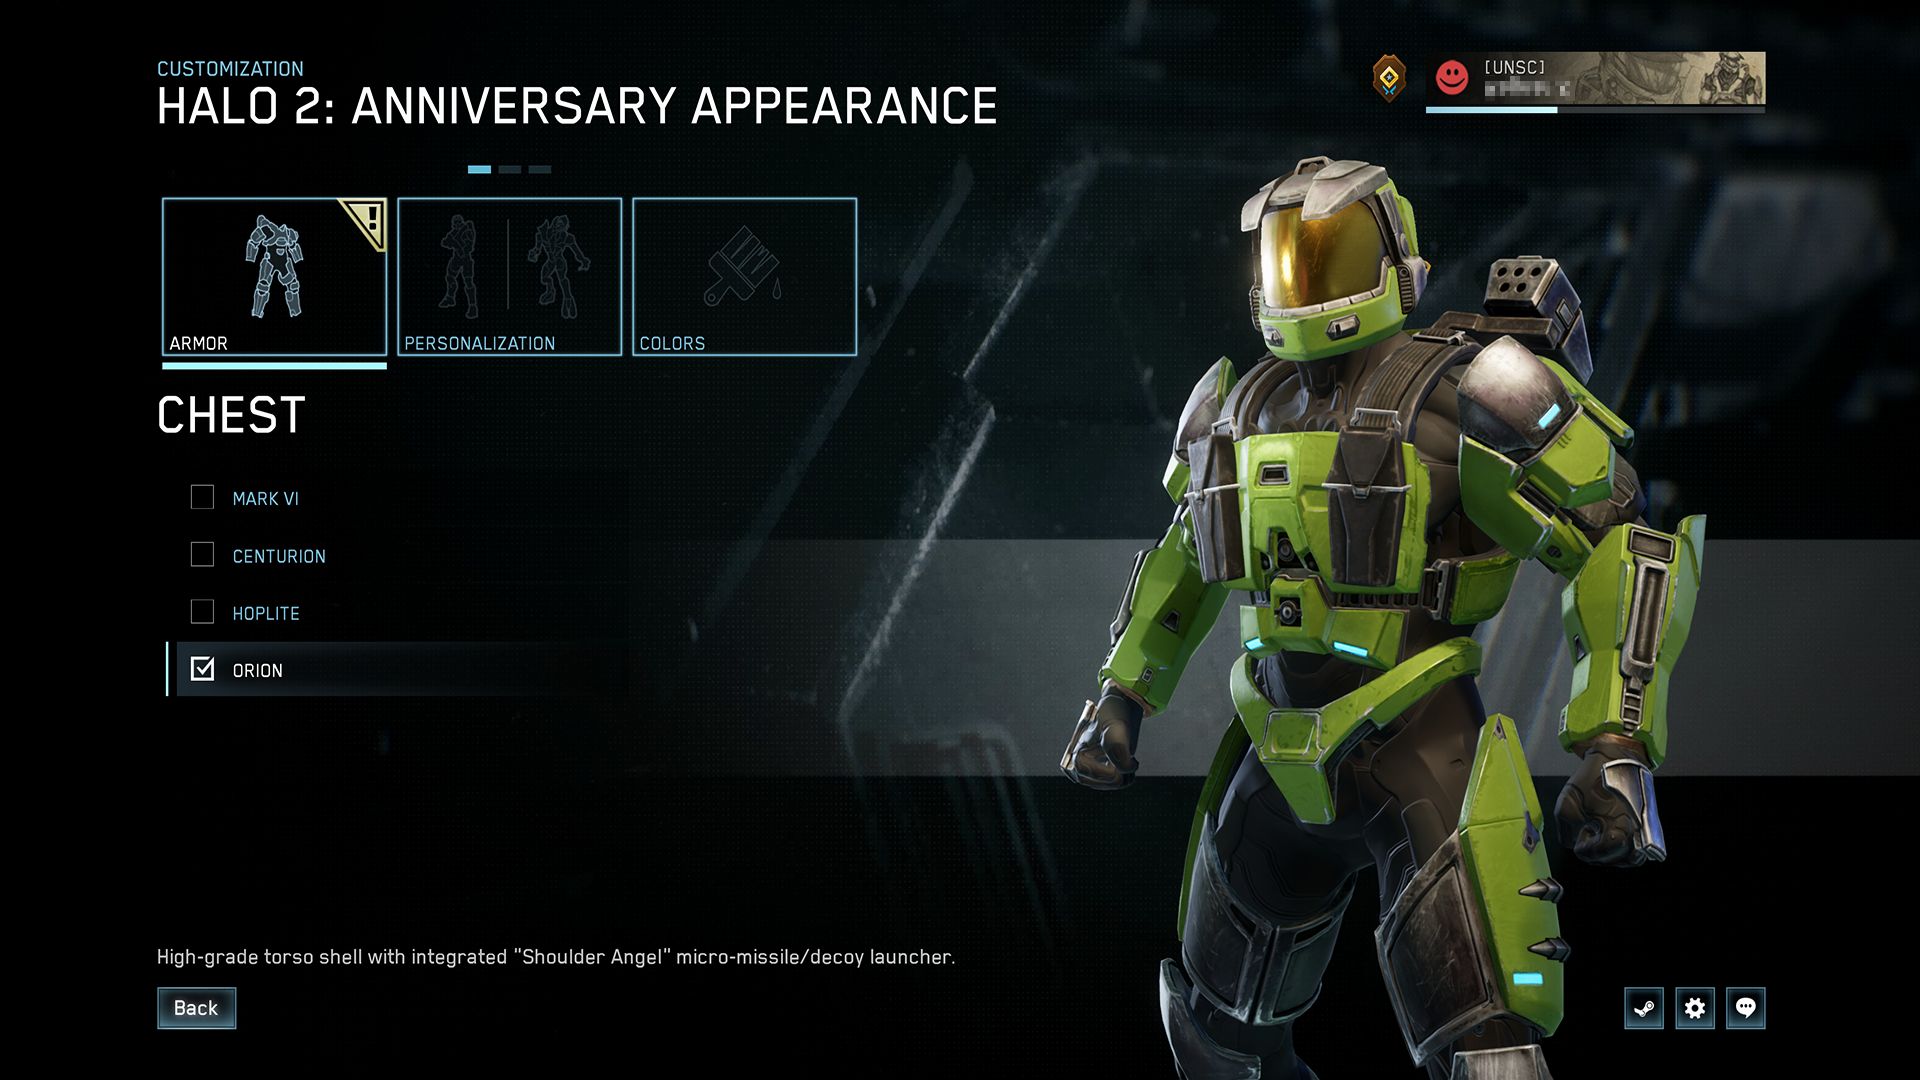 Halo Infinite given early multiplayer launch for 20th anniversary